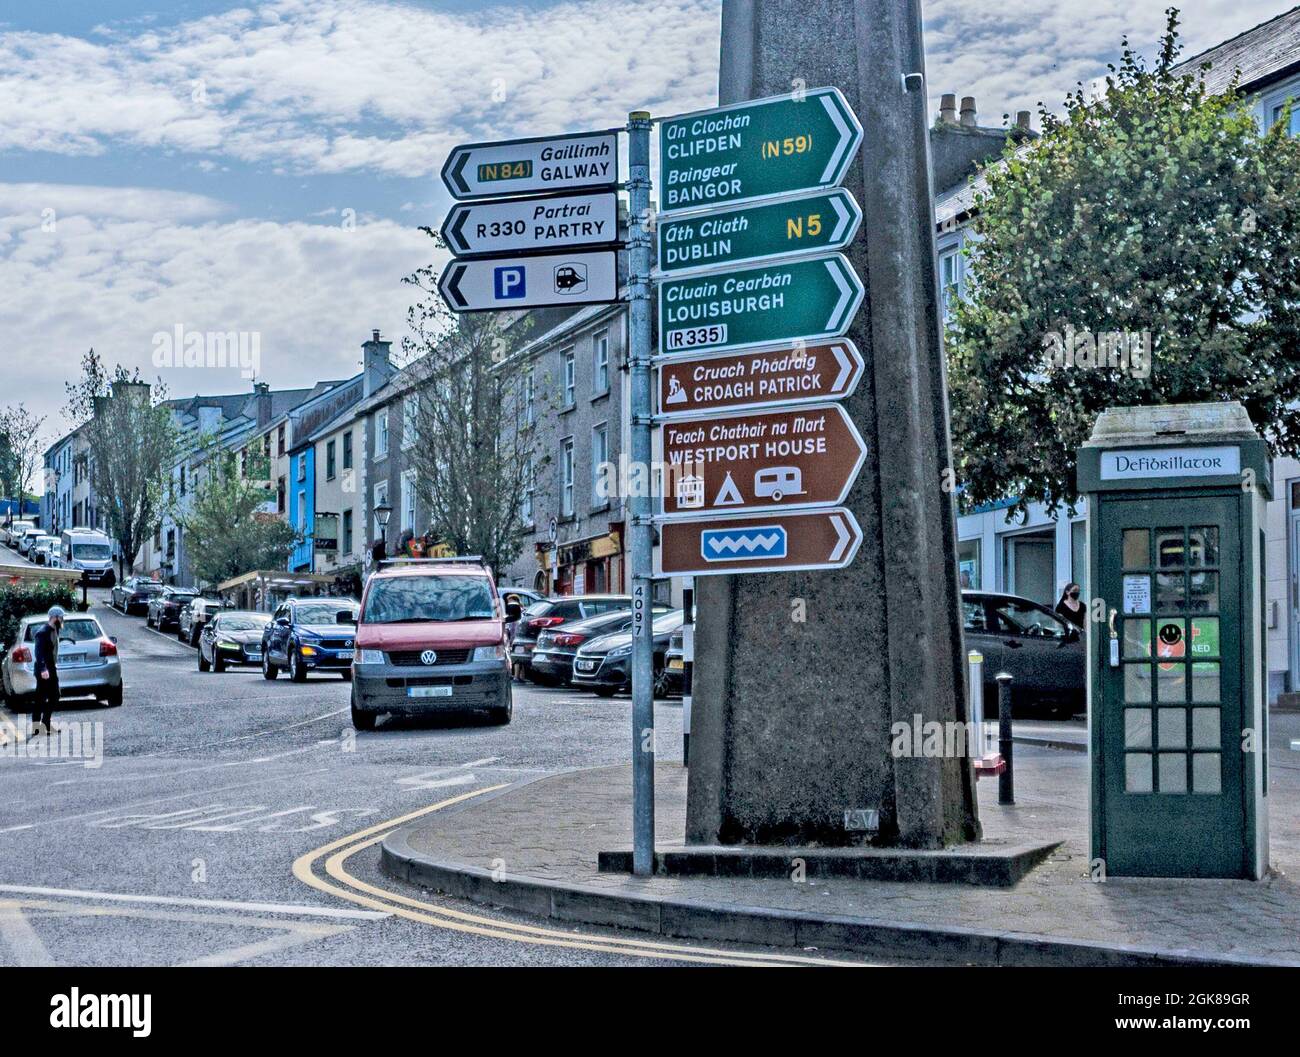 A traffic direction signpost in Westport, County Mayo, Ireland. With directions for Galway, Dublin and Louisburgh among others. Stock Photo